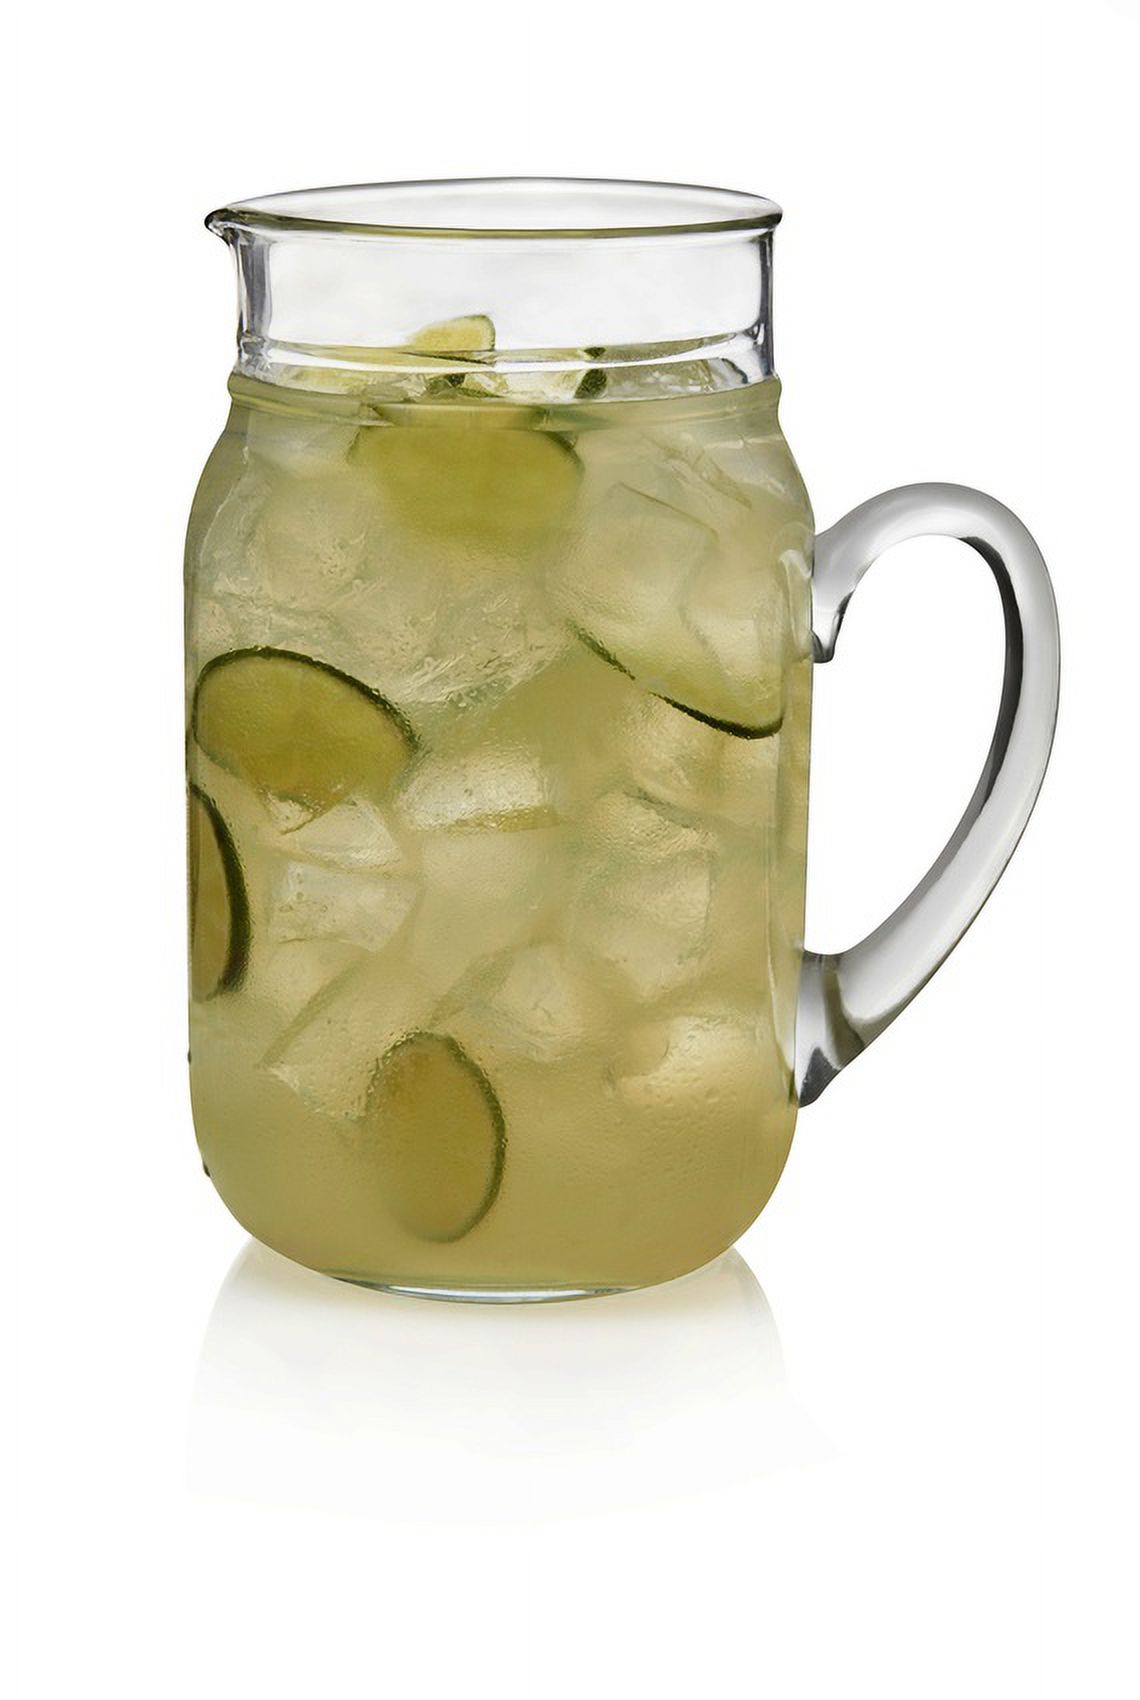 Libbey Drinking Jar Pitcher, Glass - image 2 of 4